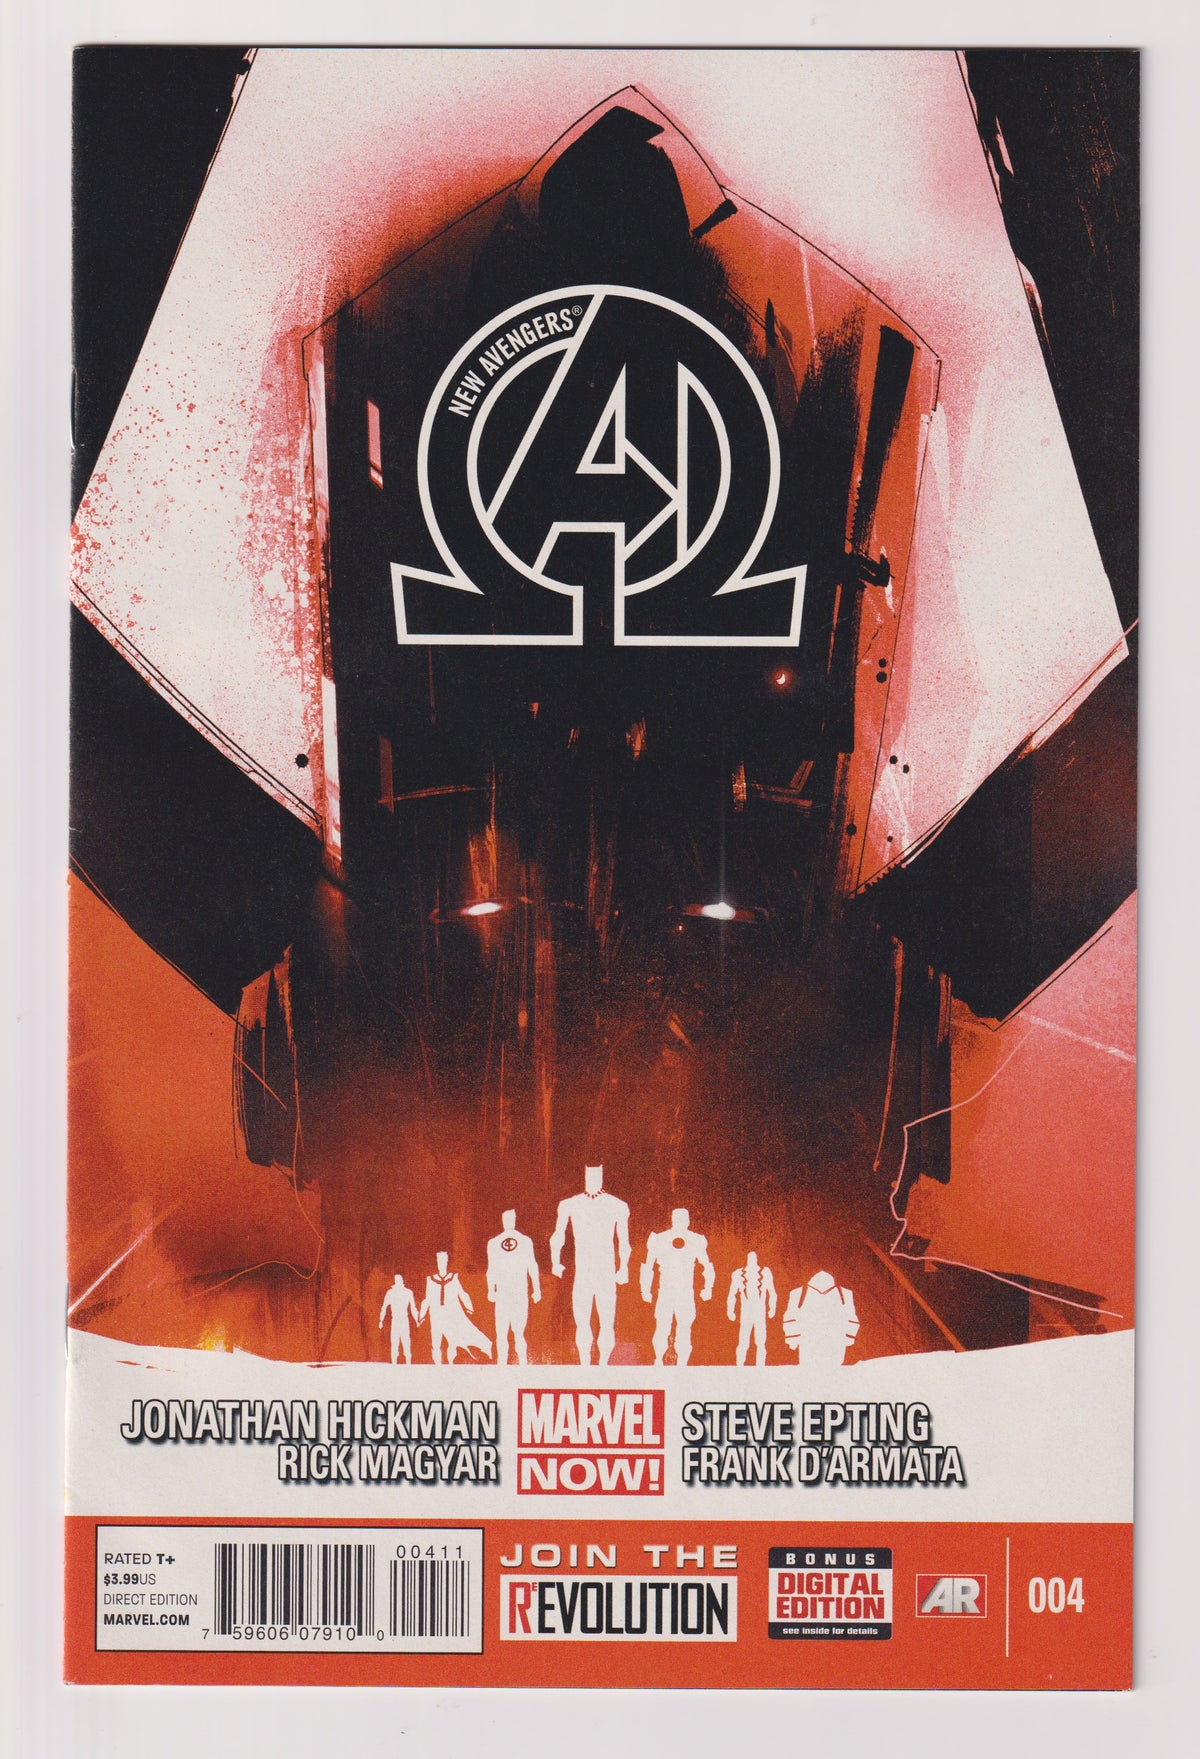 Photo of New Avengers, Vol. 3 (2013)  Iss 4A Near Mint  Comic sold by Stronghold Collectibles